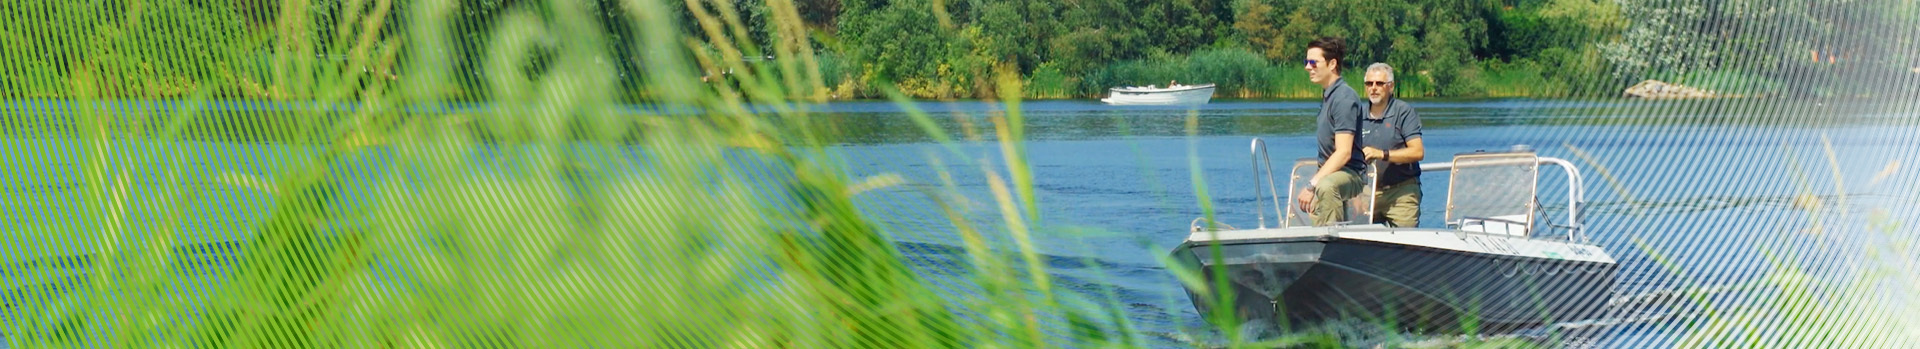 Banners 1920x349 - WATER